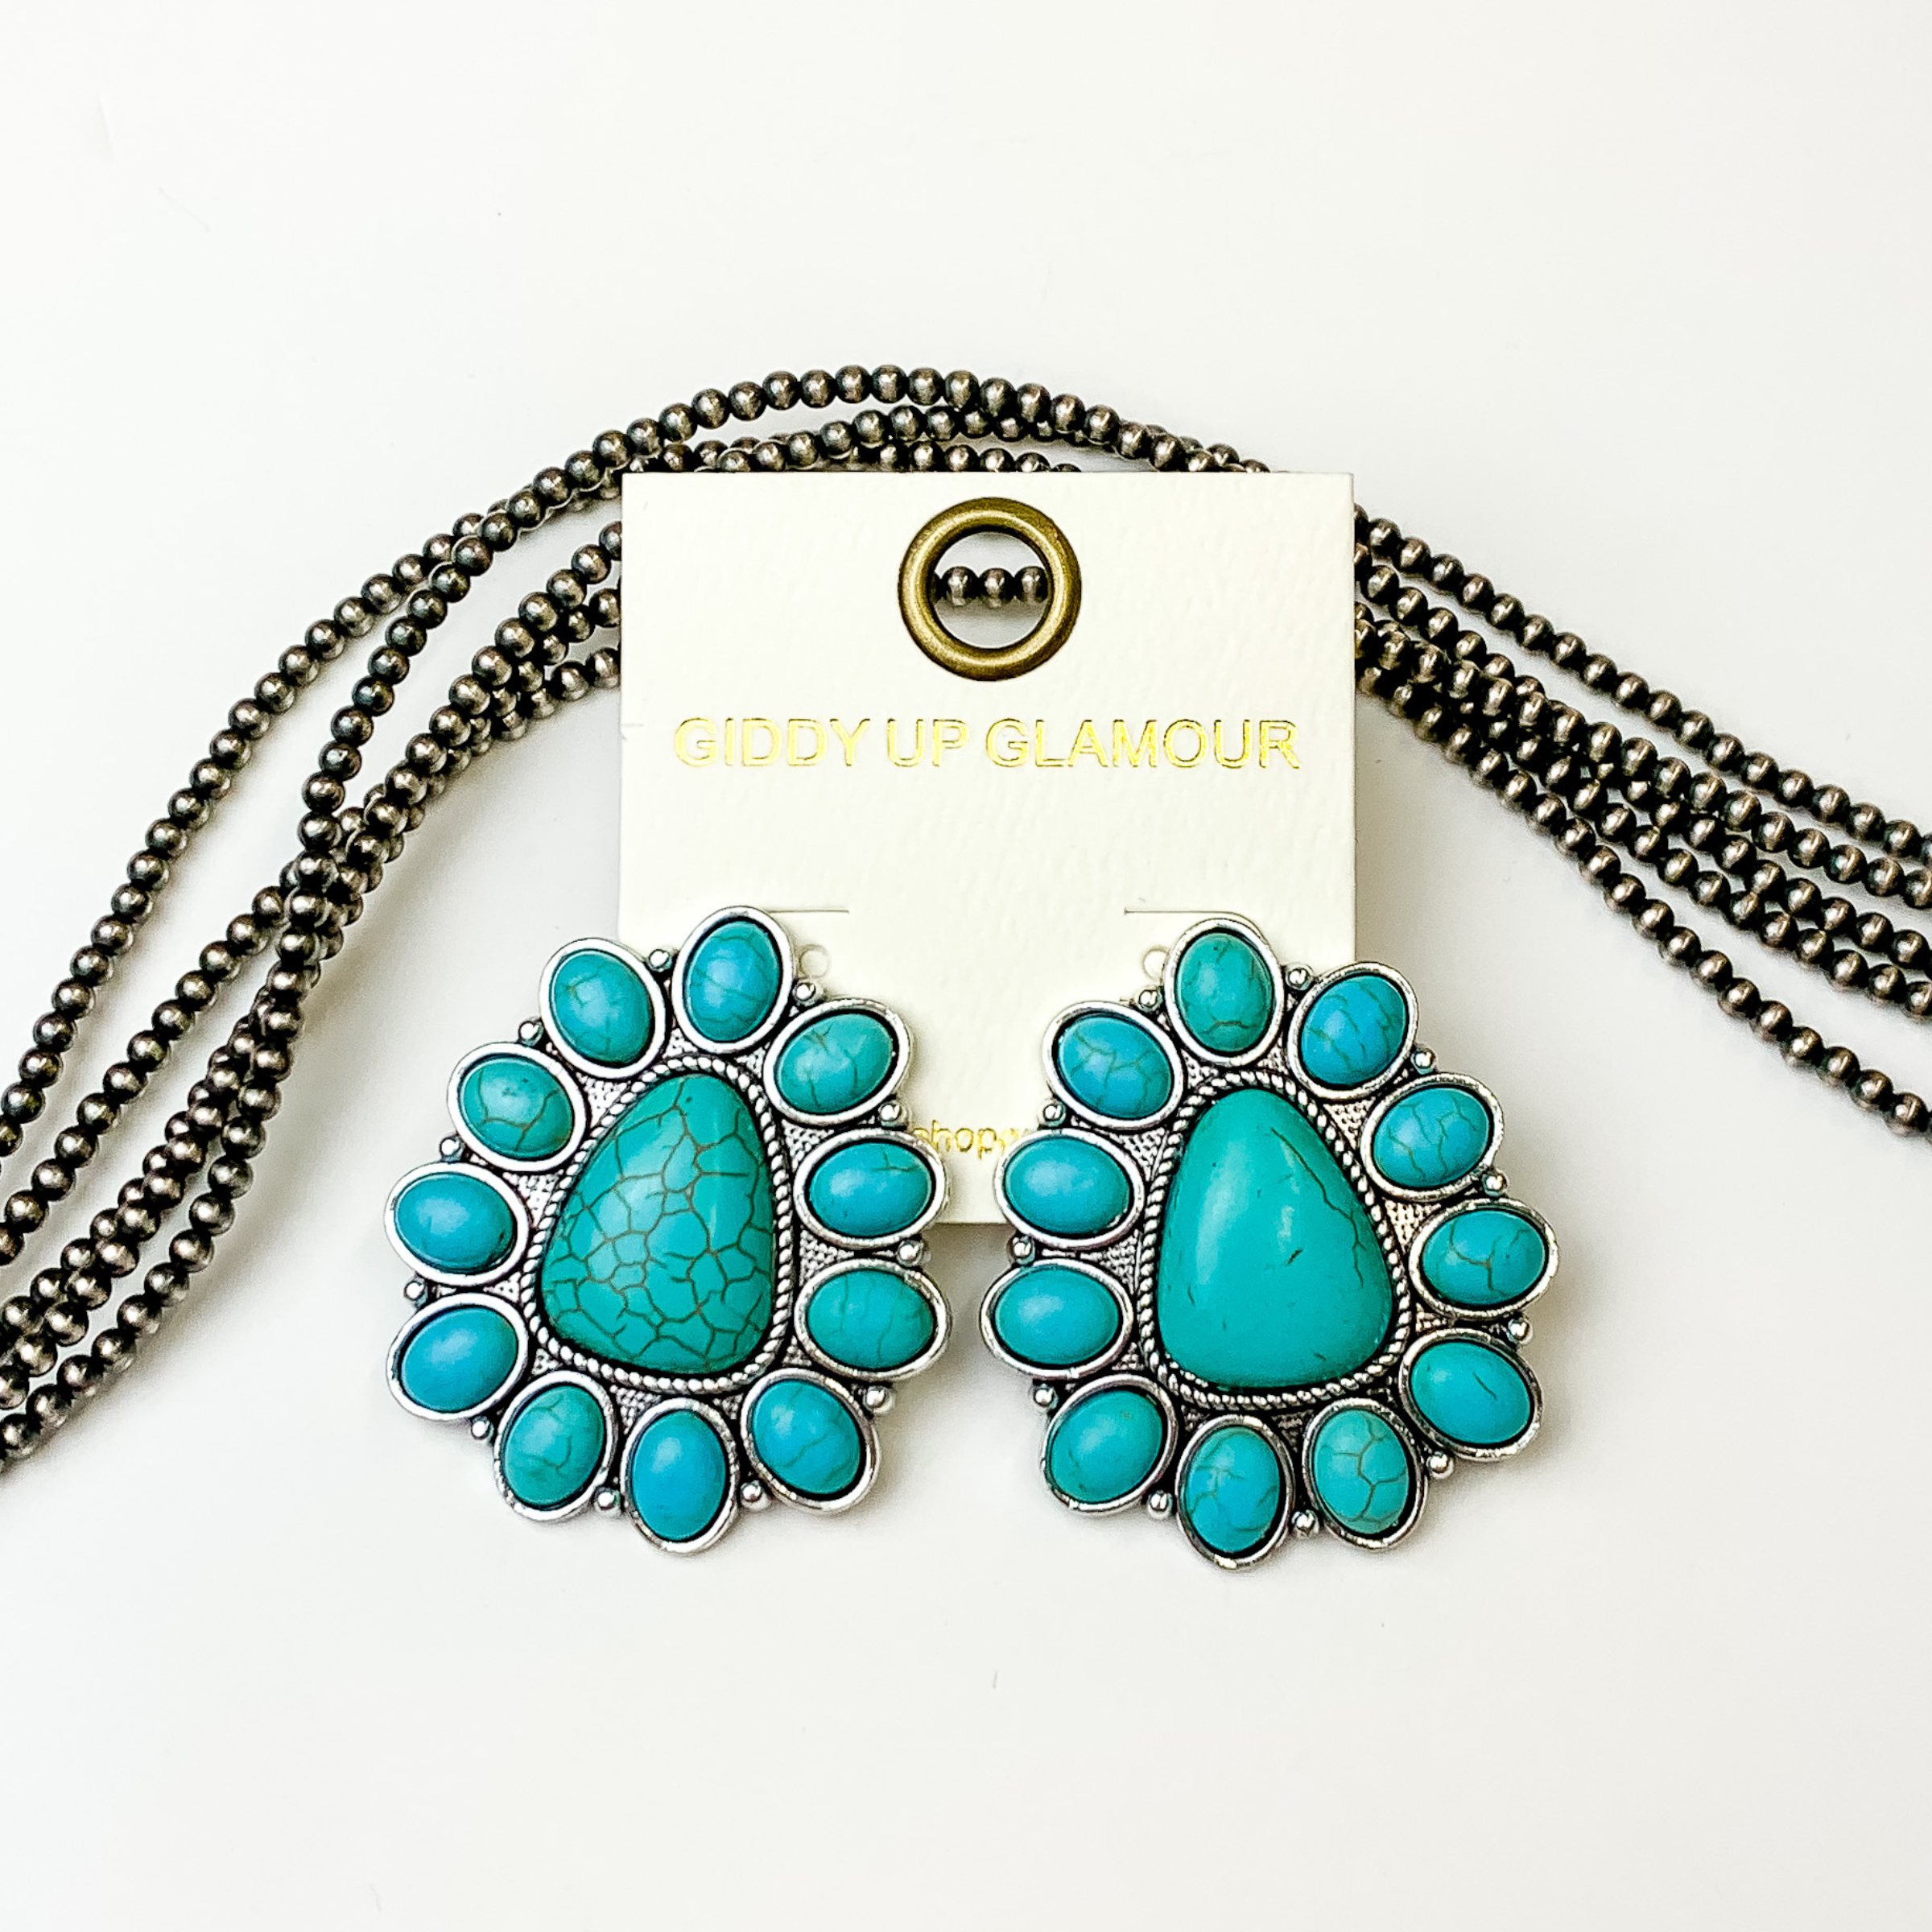 Triangular turquoise stone cluster earrings. These earrings are pictured on a white background with silver beads behind the earrings. 